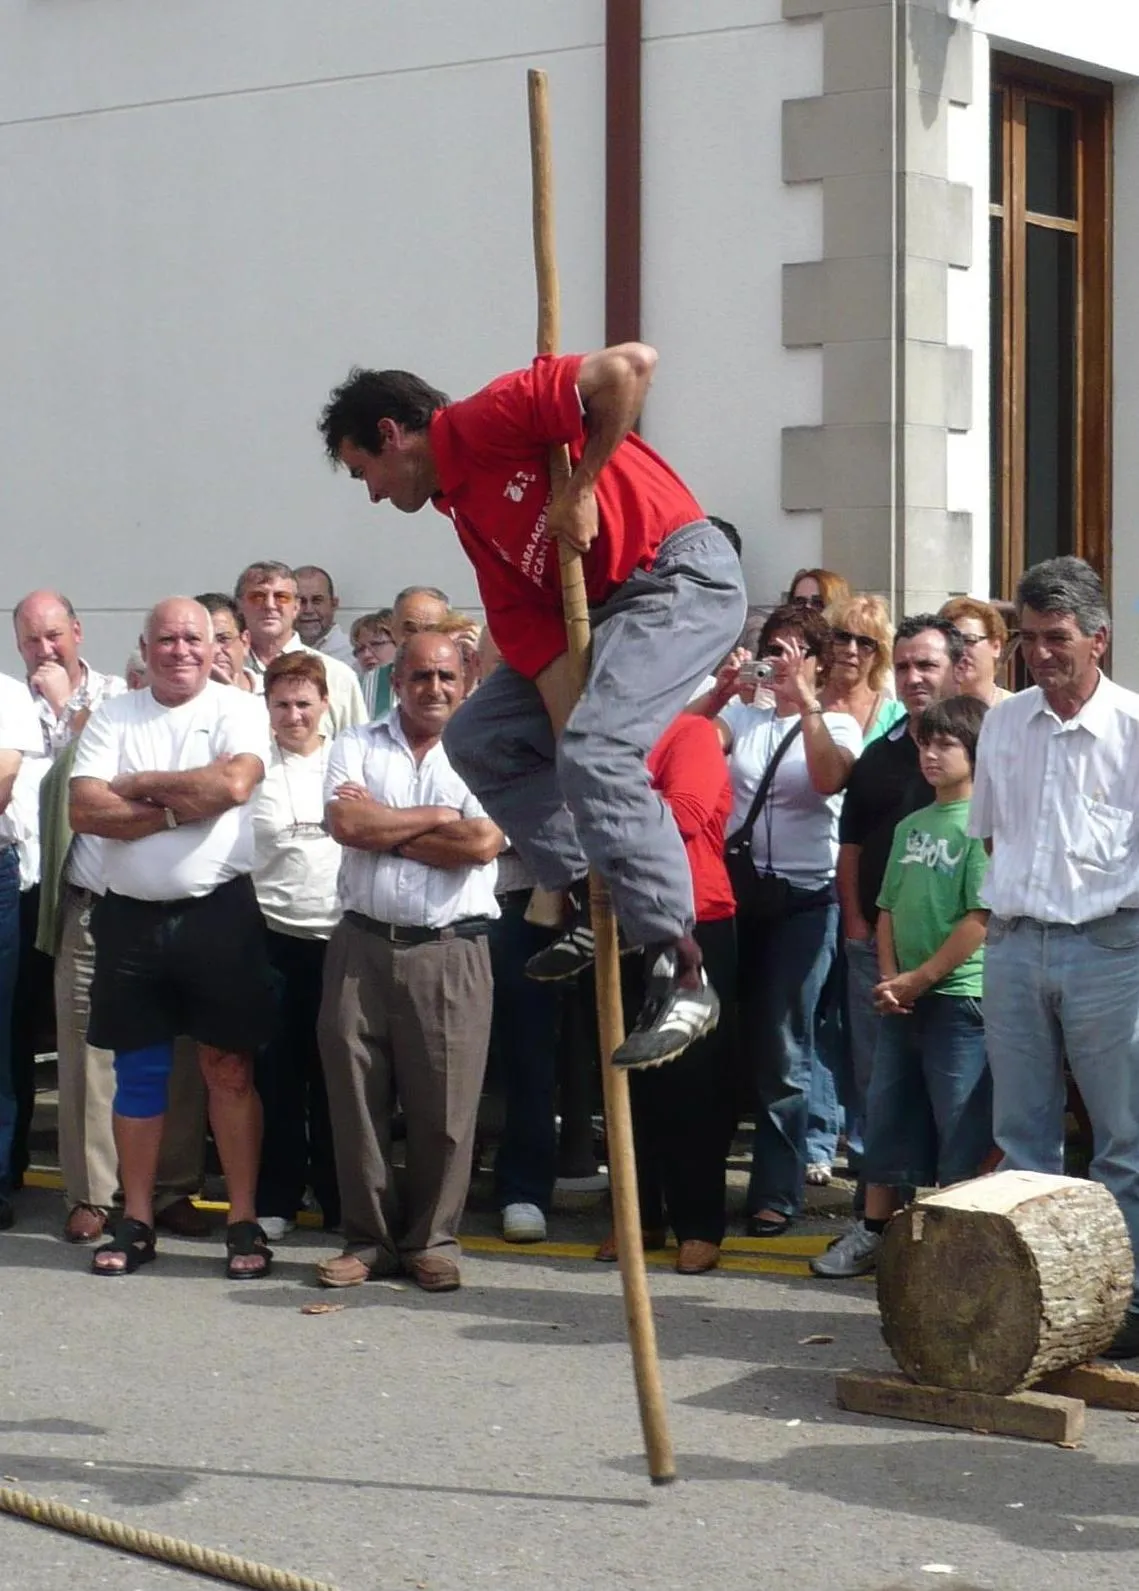 Photo showing: Man riding the stick on 28 July, Day of Cantabria, in Puente San Miguel, Cantabria, Spain.